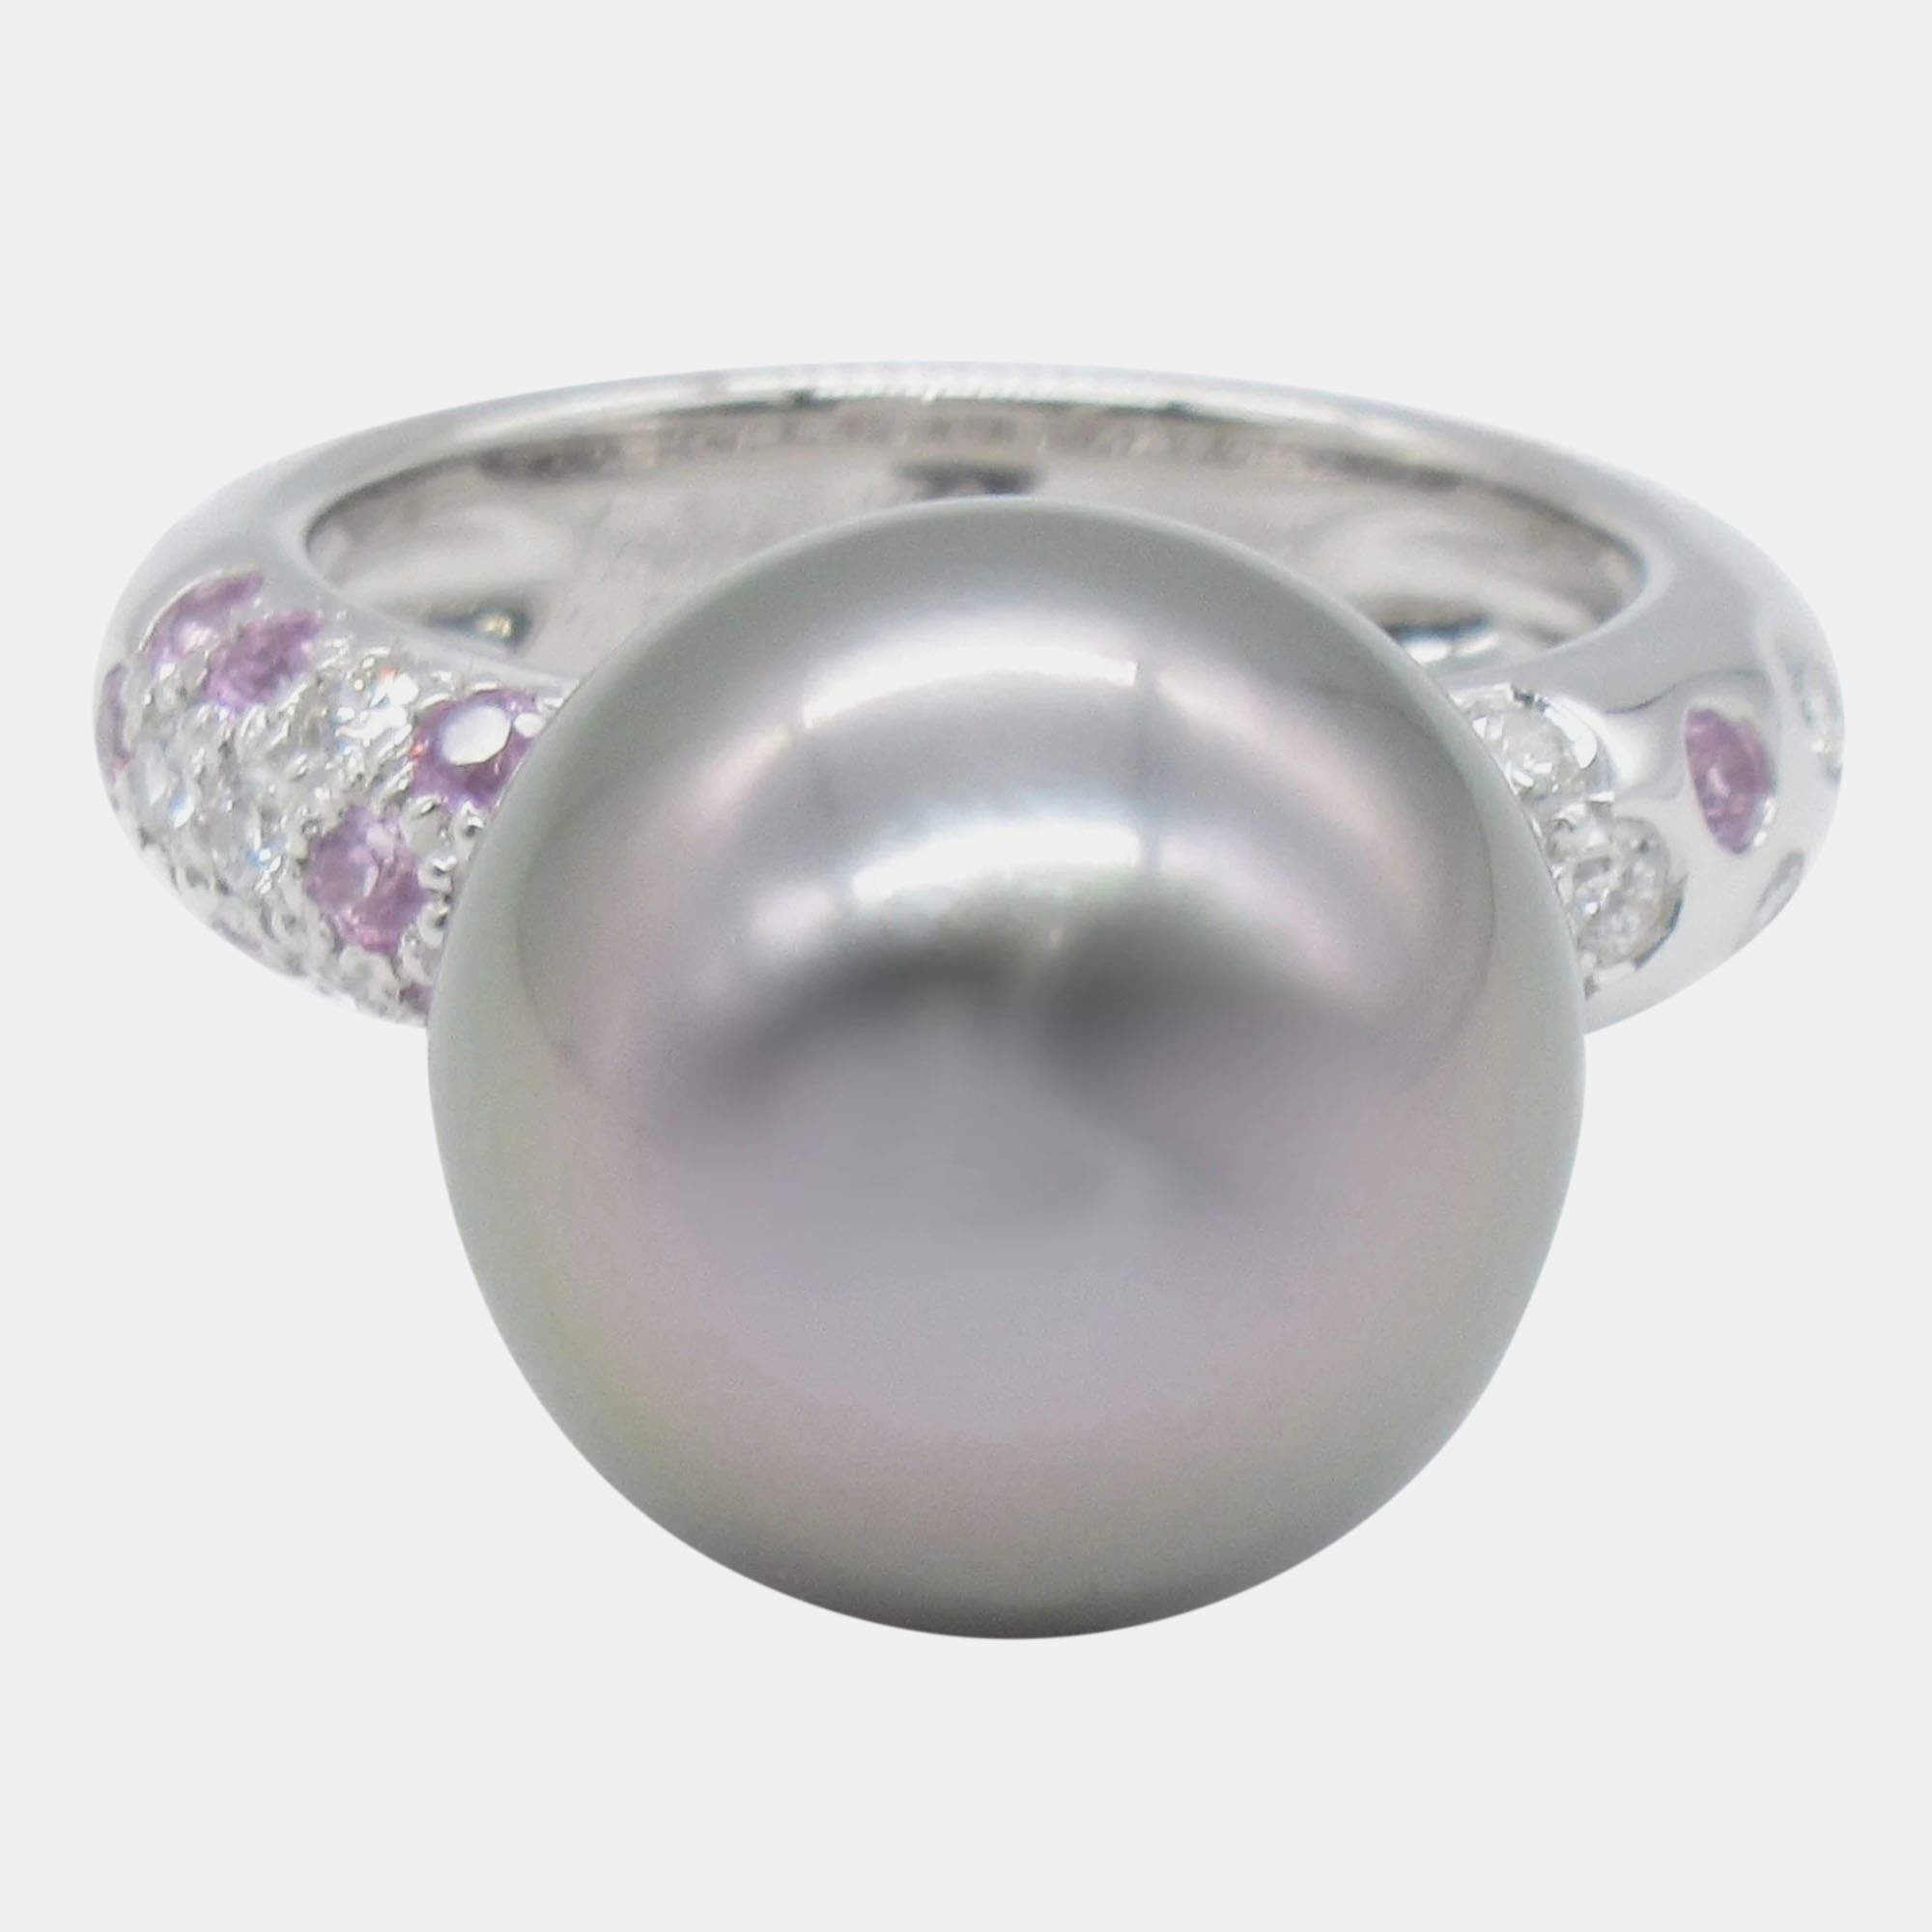 Cartier 18K White Gold, Pearl, Diamond and Sapphire Cocktail Ring EU 47